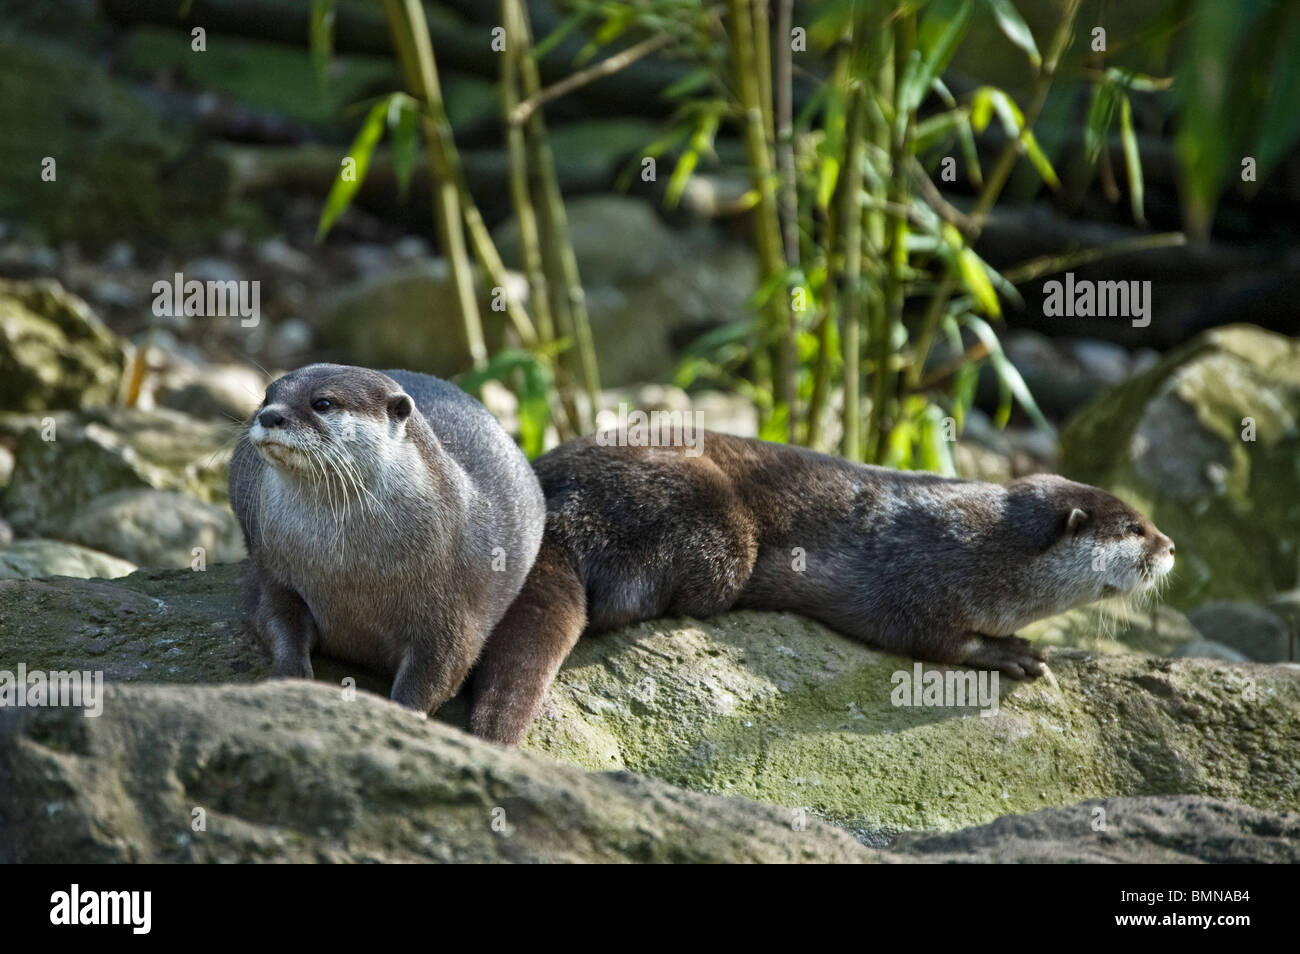 Otters at London Zoo. Stock Photo